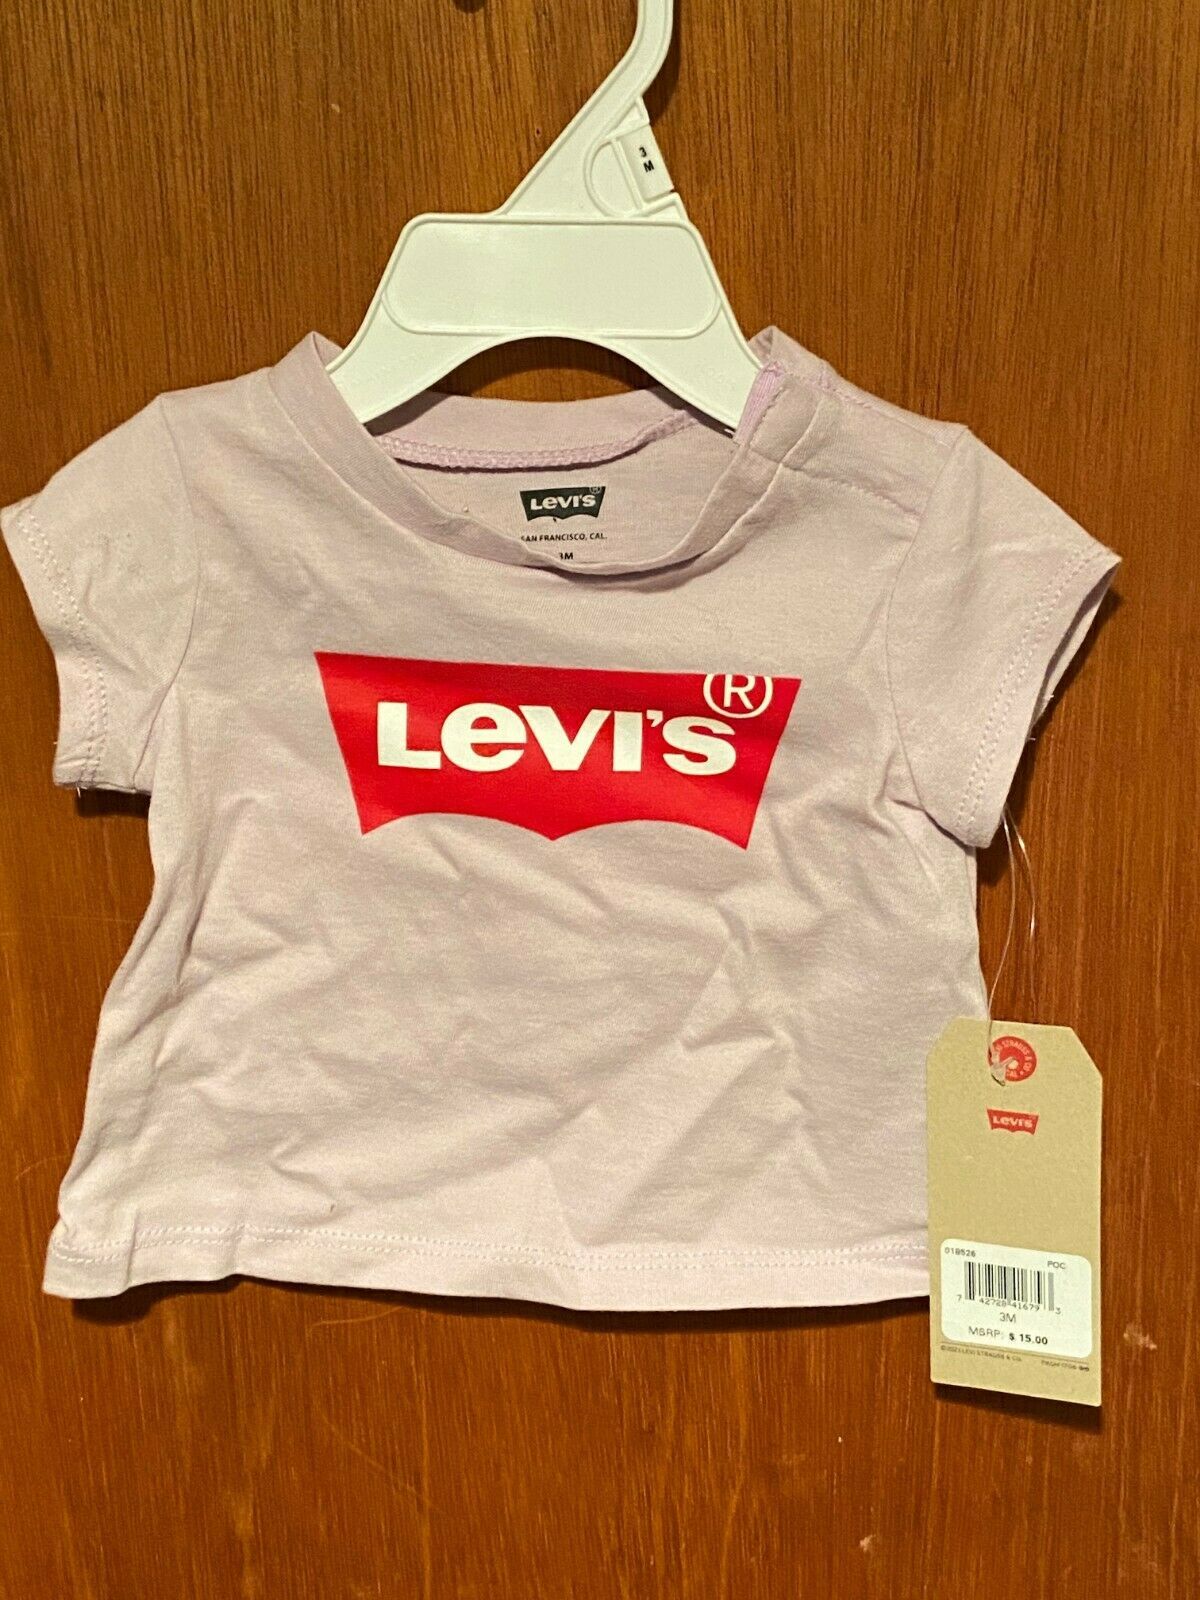 Pink Levi's Logo Shirt 6 Month *New w/Tags* v1 - $12.99